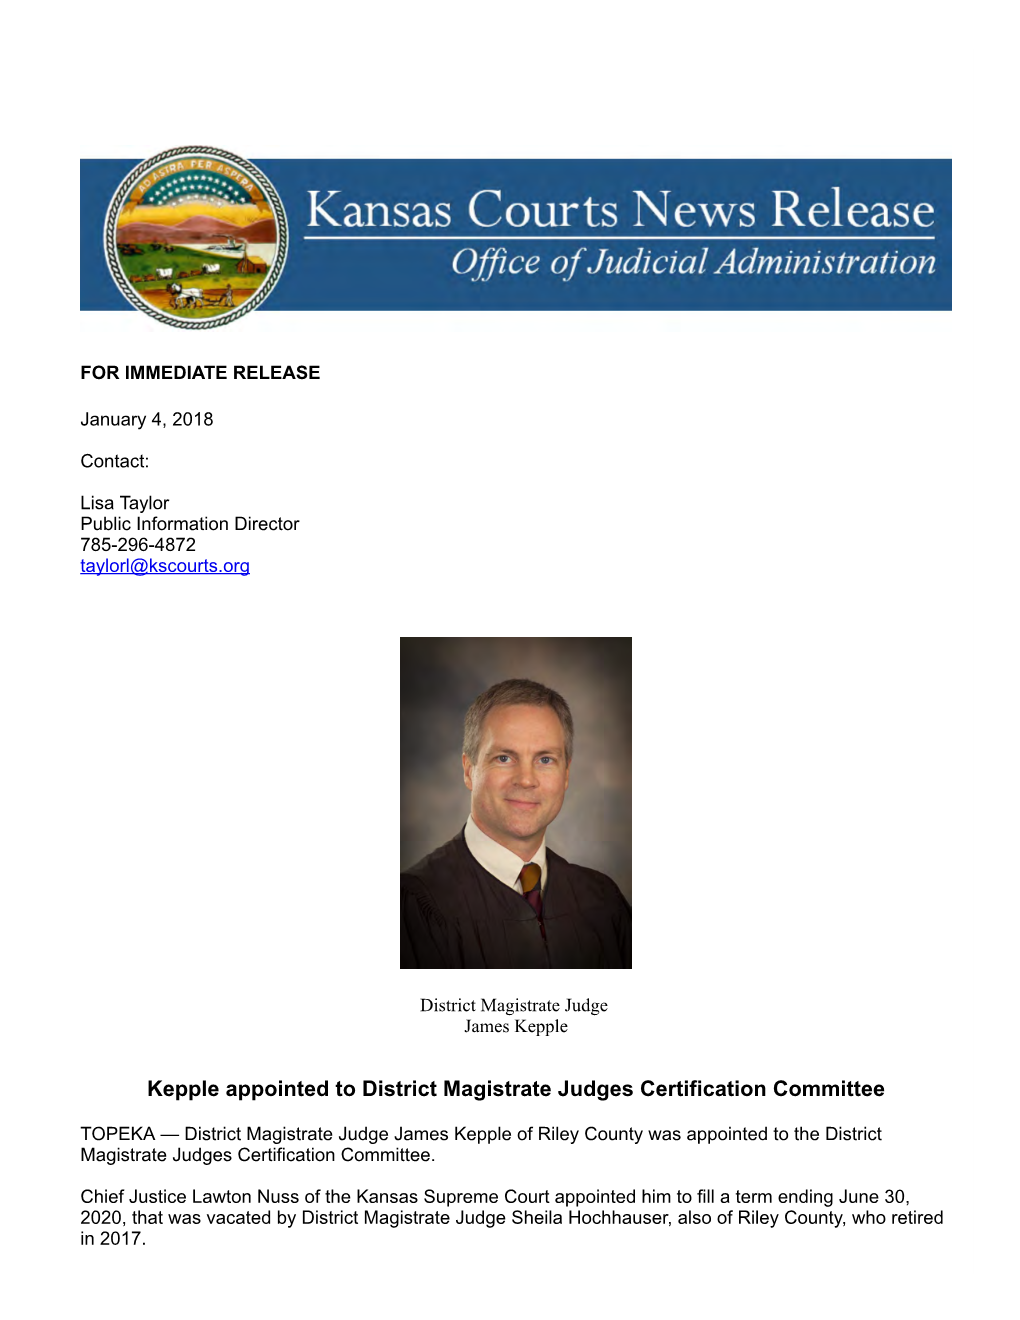 Kepple Appointed to District Magistrate Judges Certification Committee